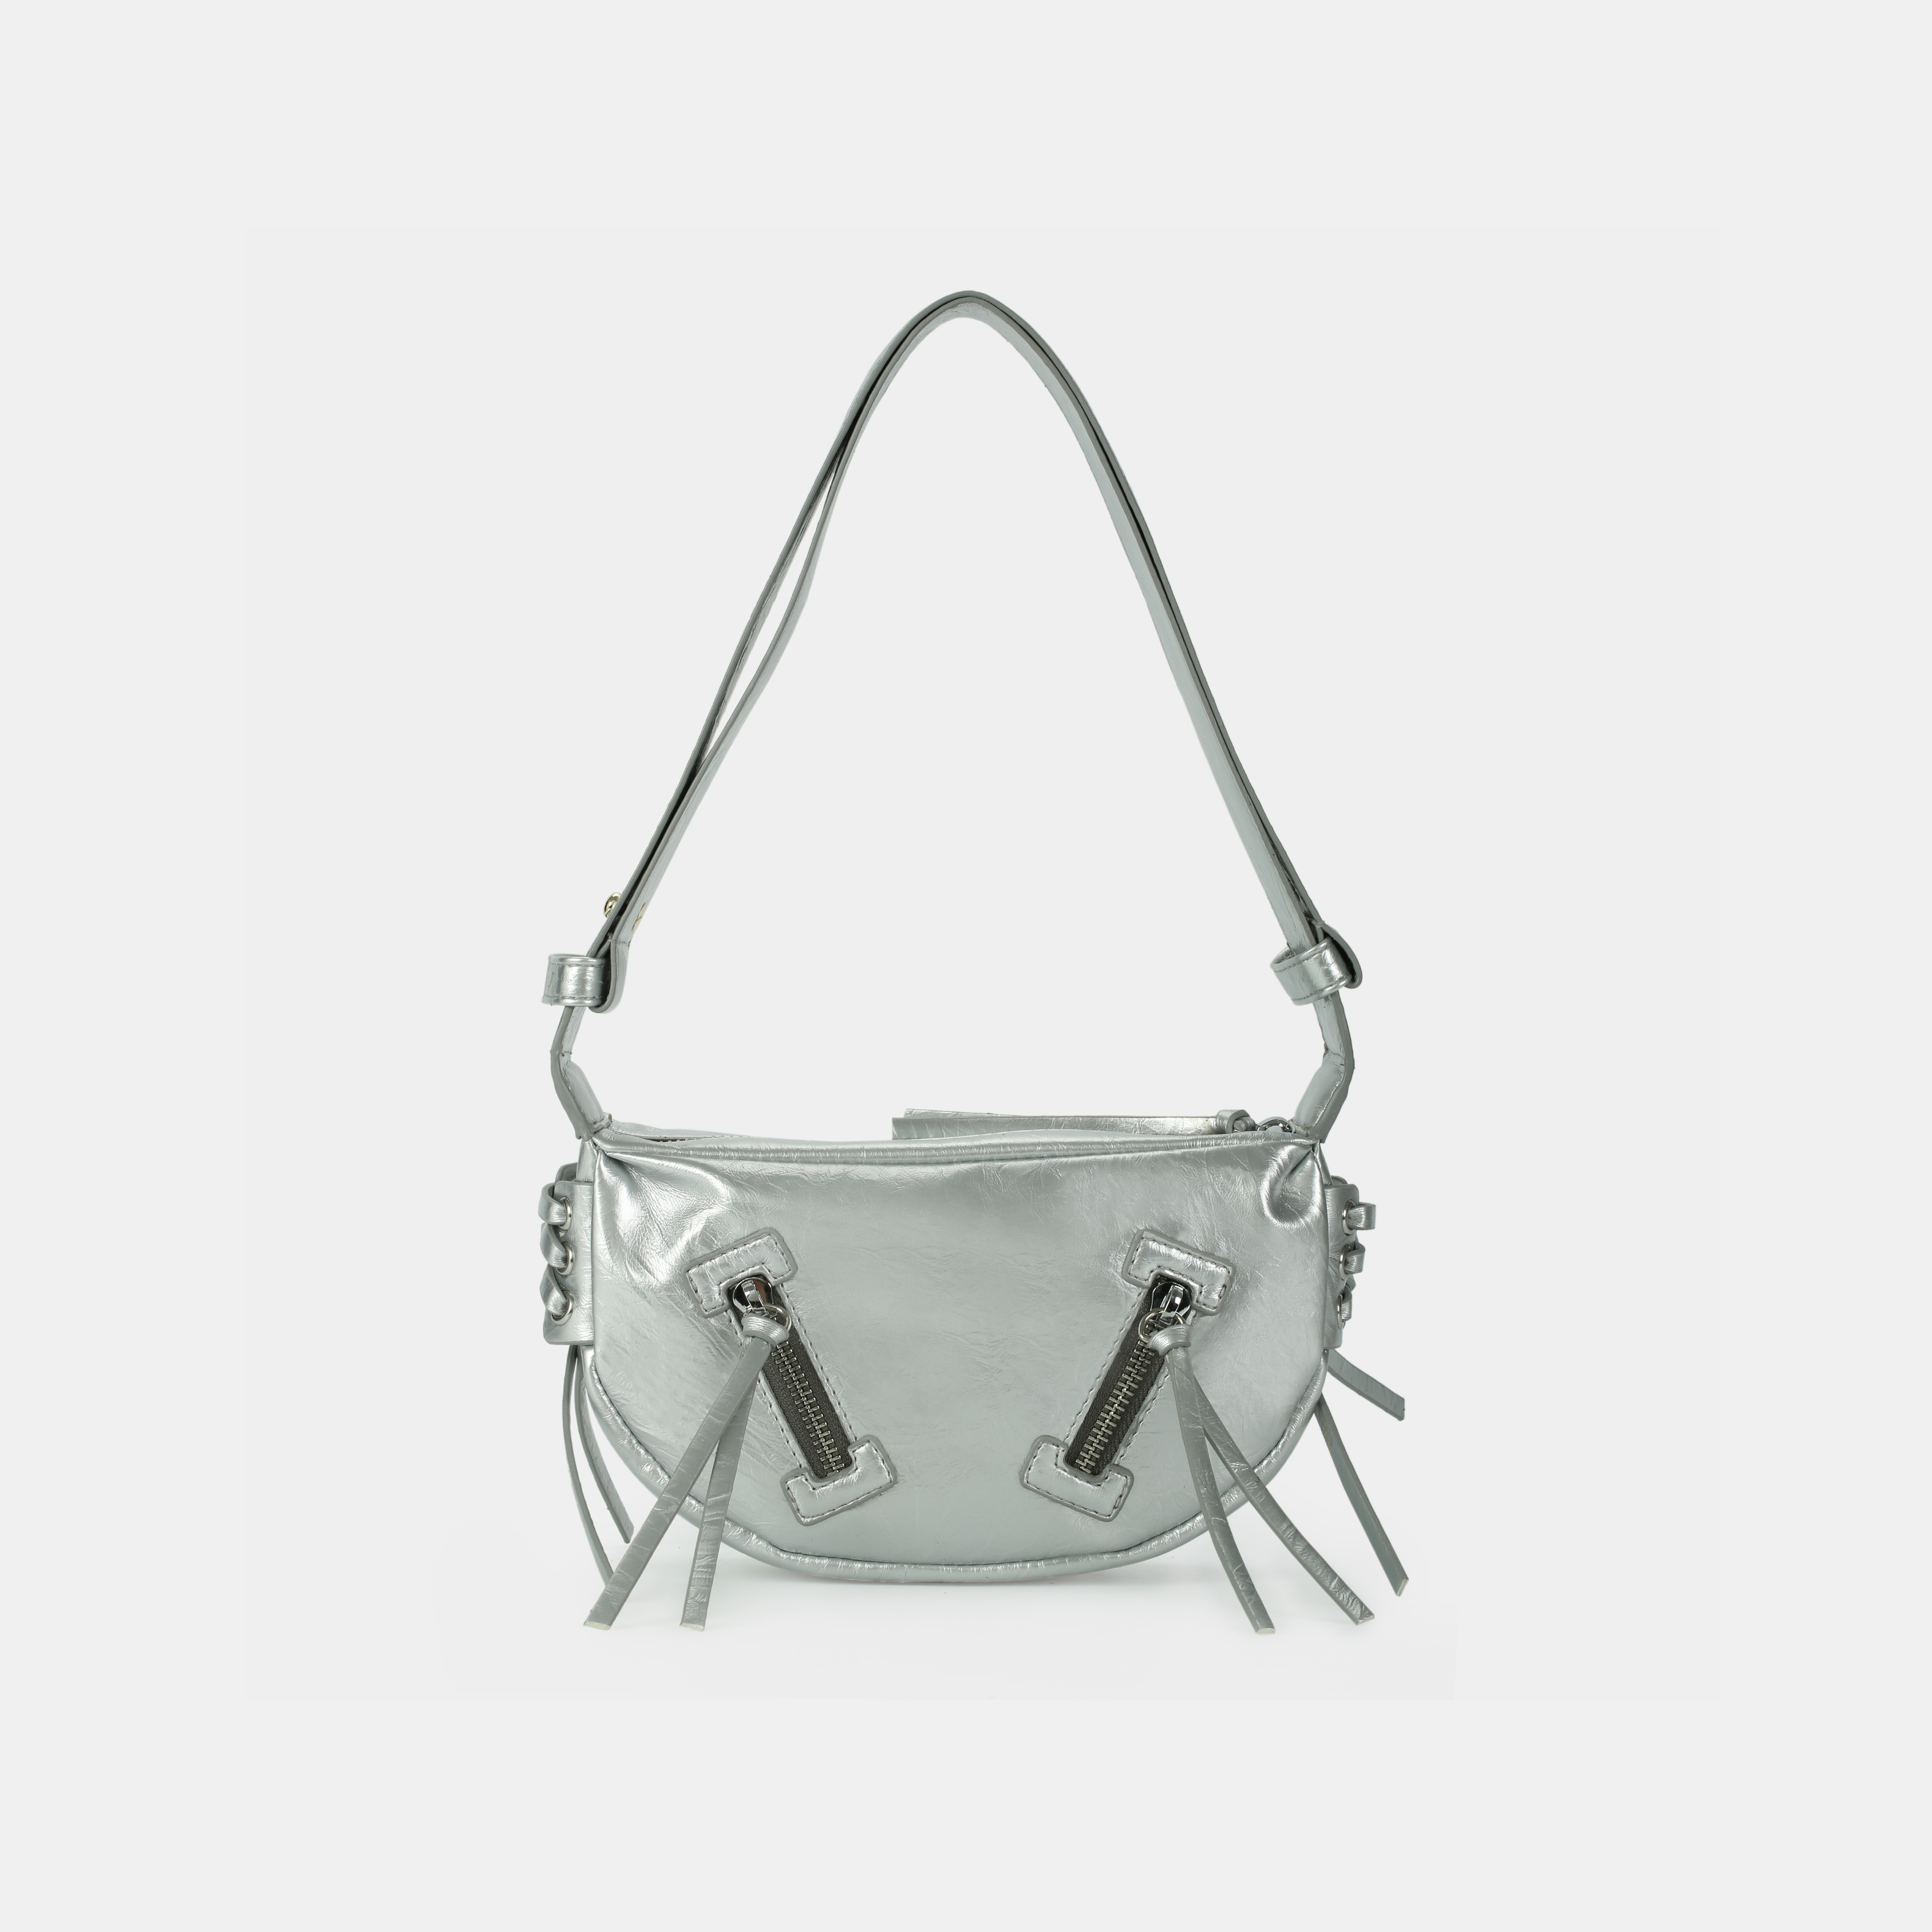 LACE bag small size (S) silver